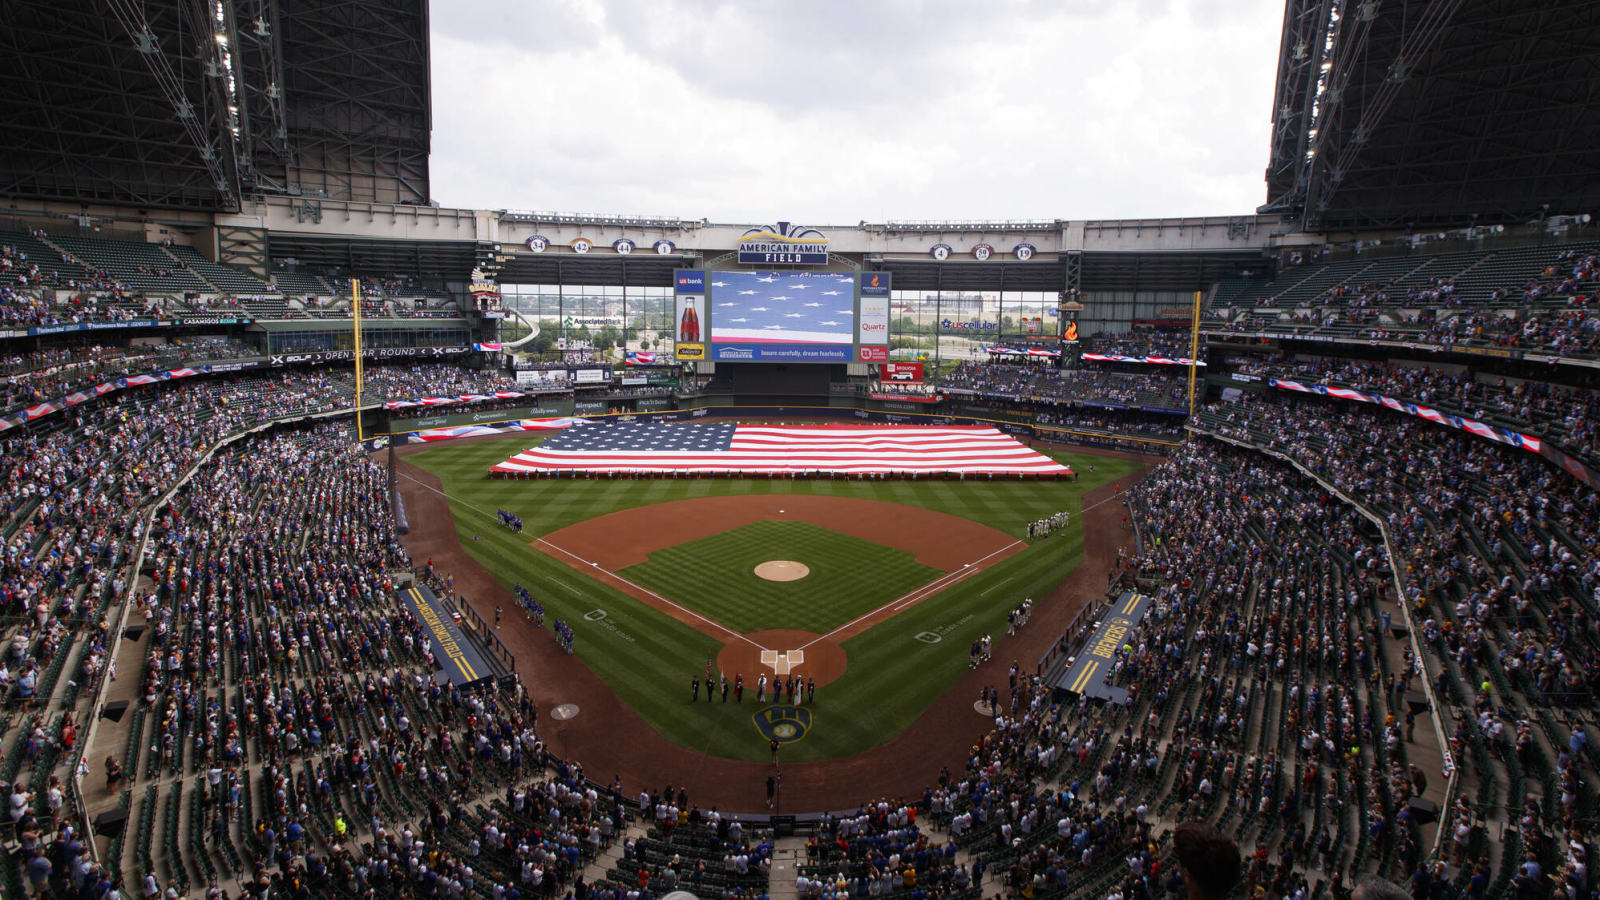 Brewers to threaten relocation without renovation funds?